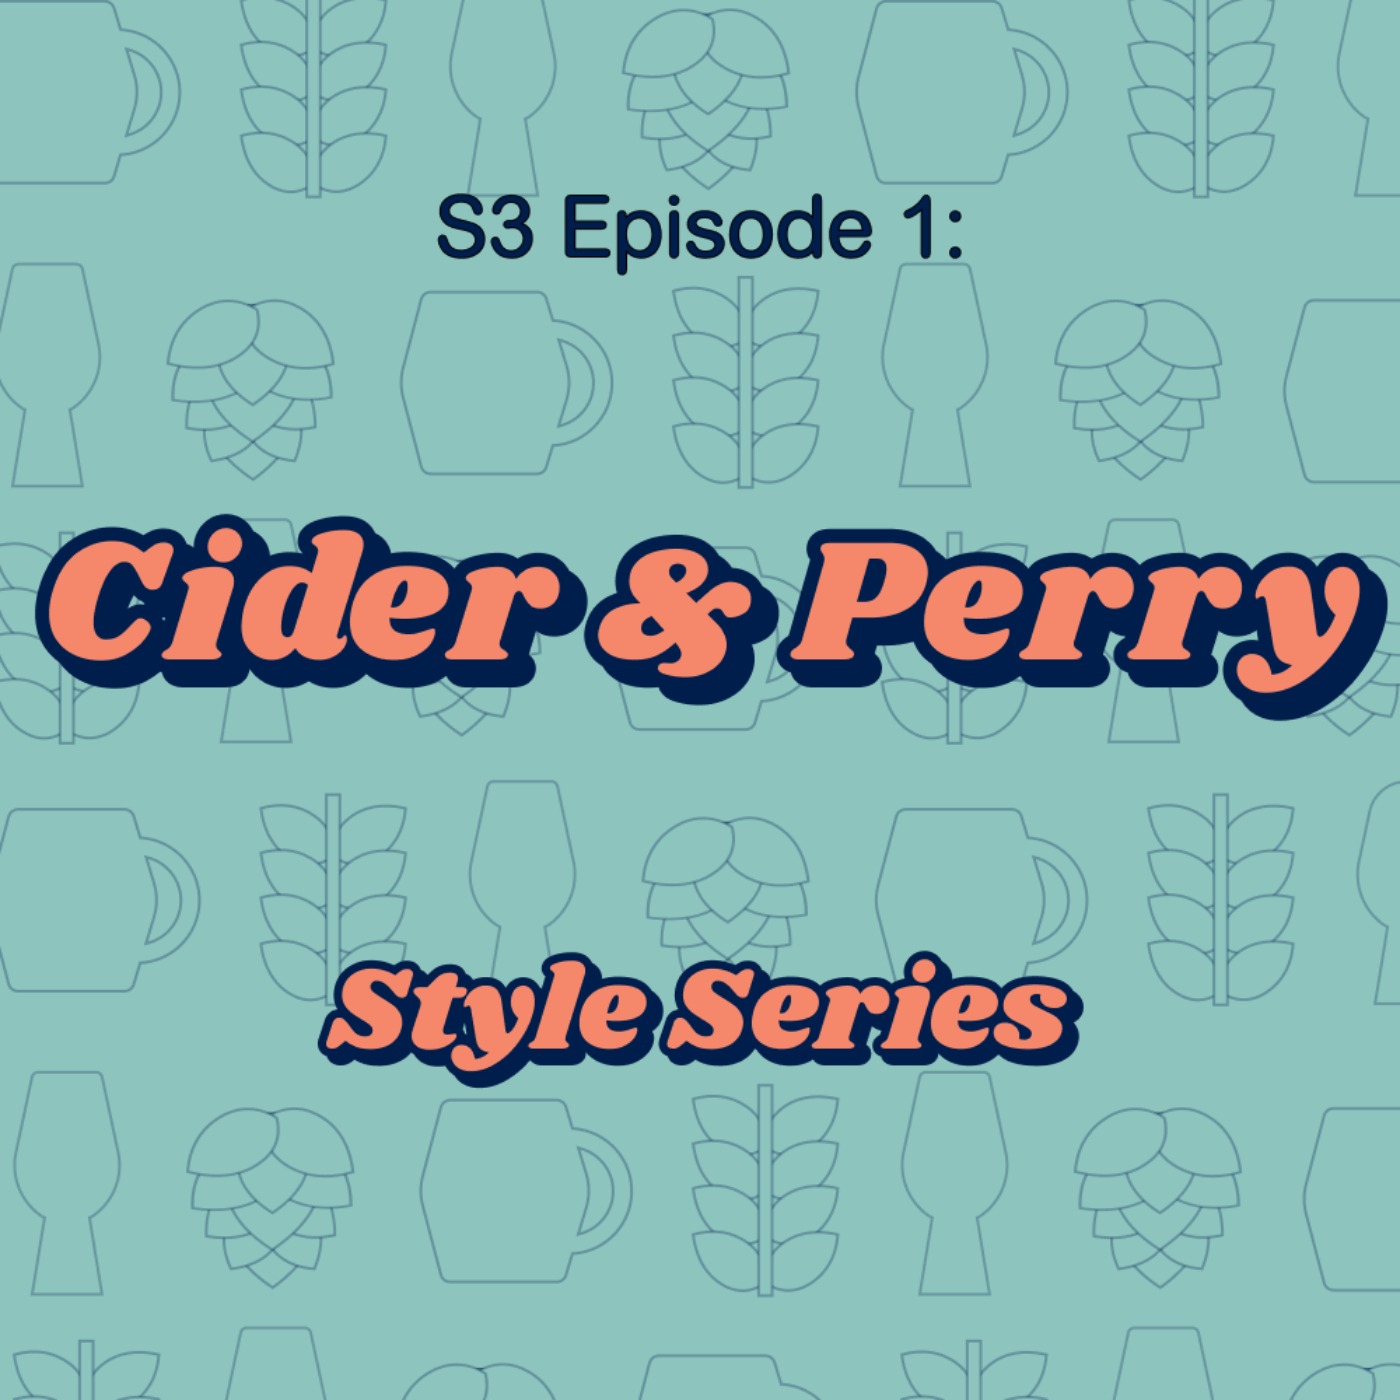 Cider & Perry